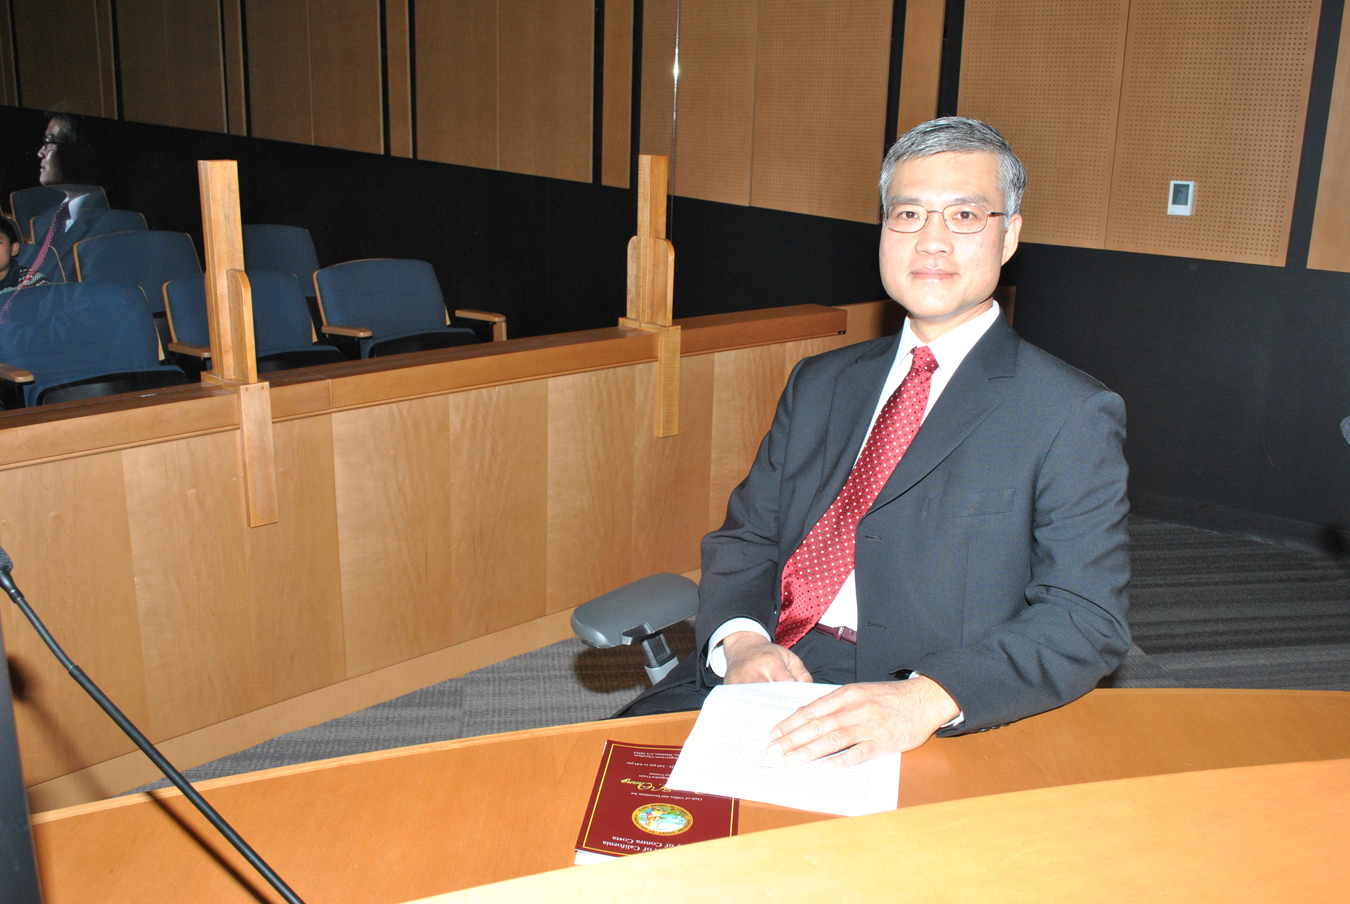 Judge Peter Chang before the investiture ceremony began.